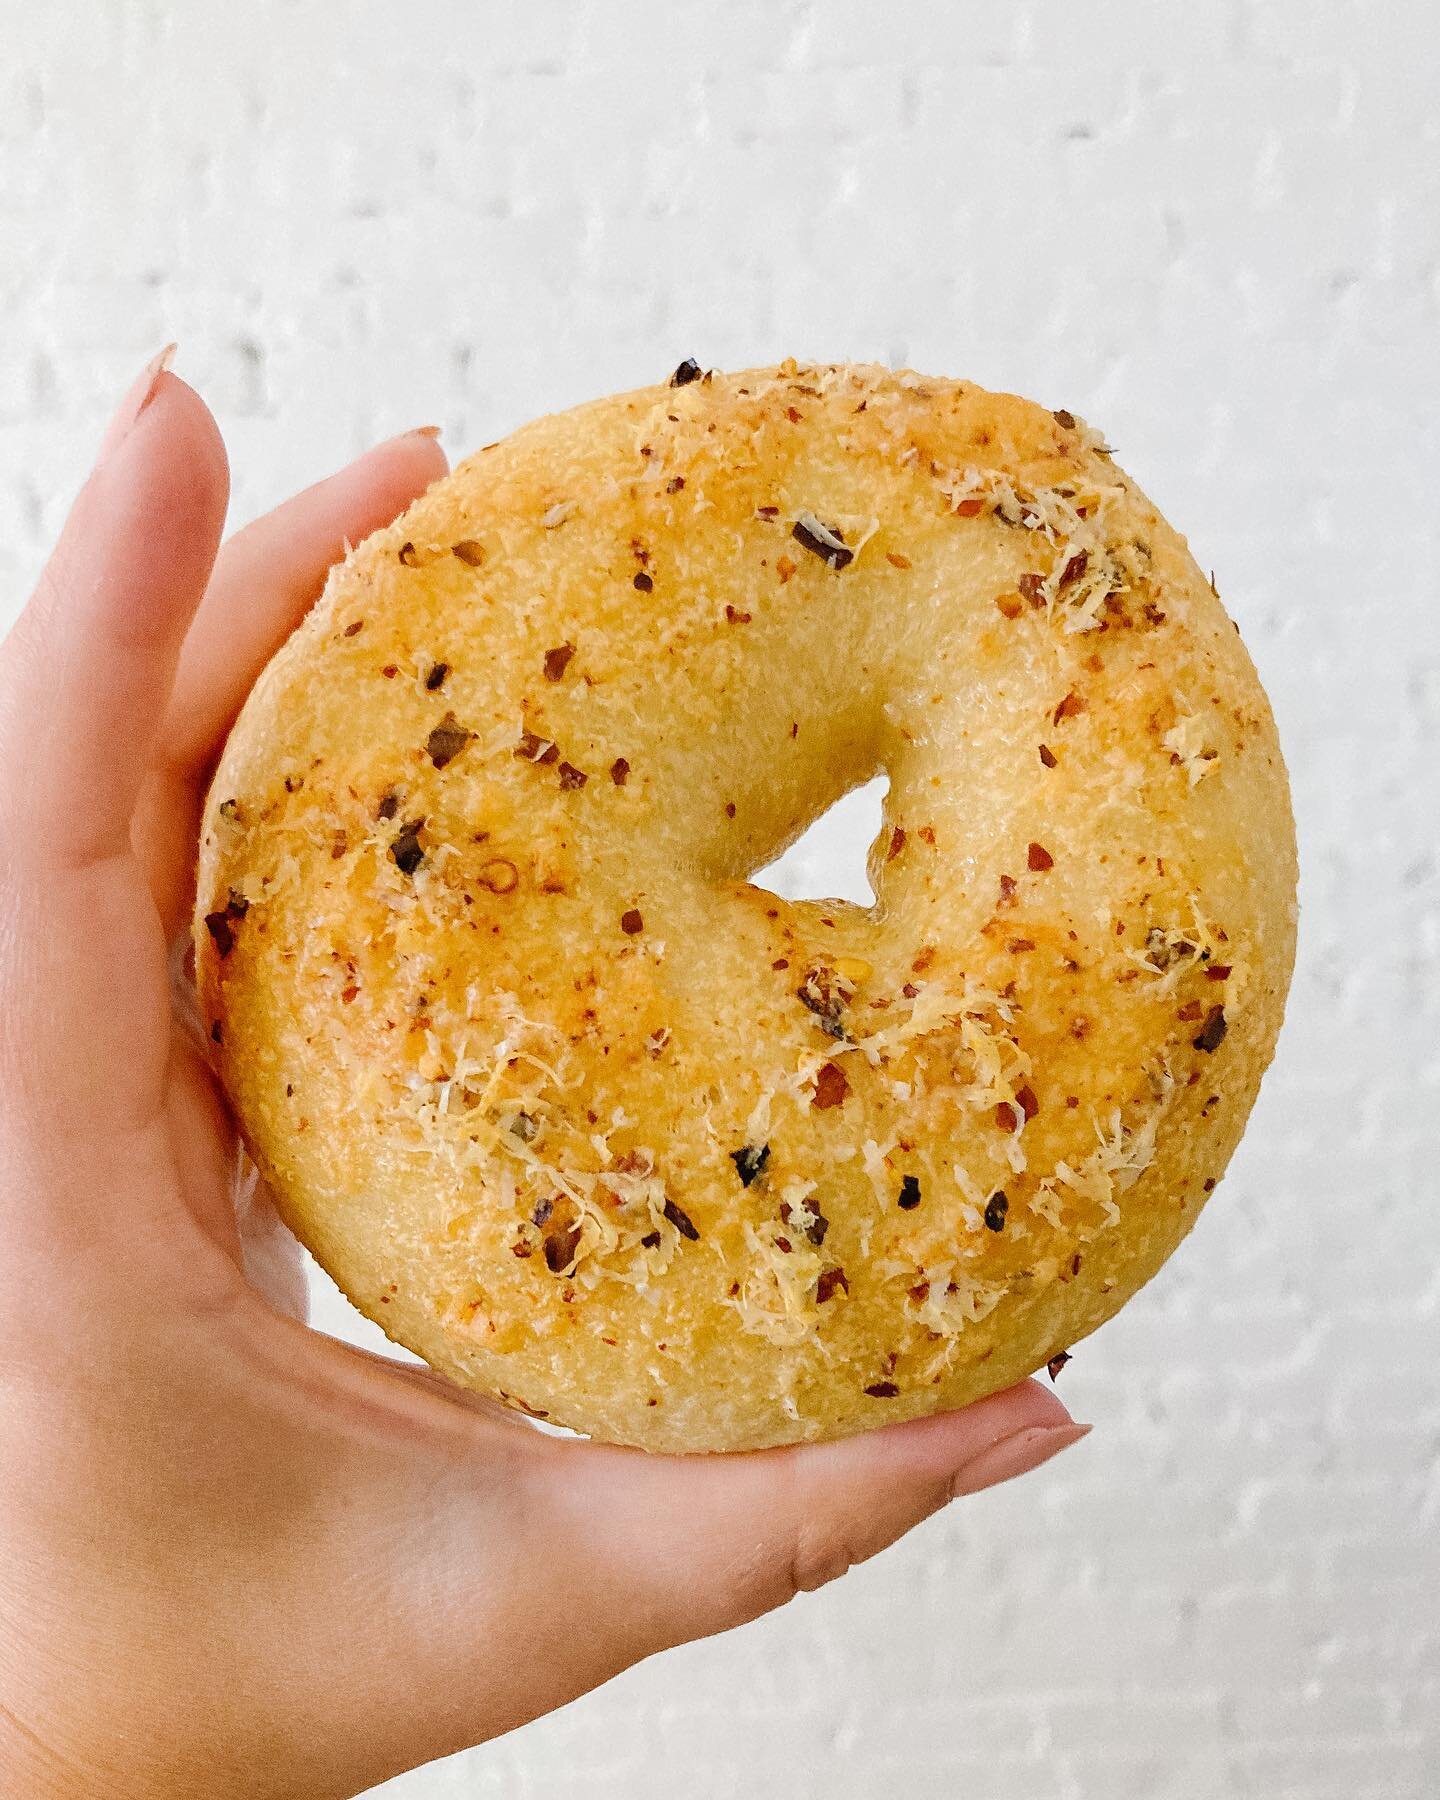 We have been loving this Spicy Parmesan Bagel. Question is, toasted with cream cheese, or a breakfast sandwich with bacon and egg?  #bagels #mainebreakfast